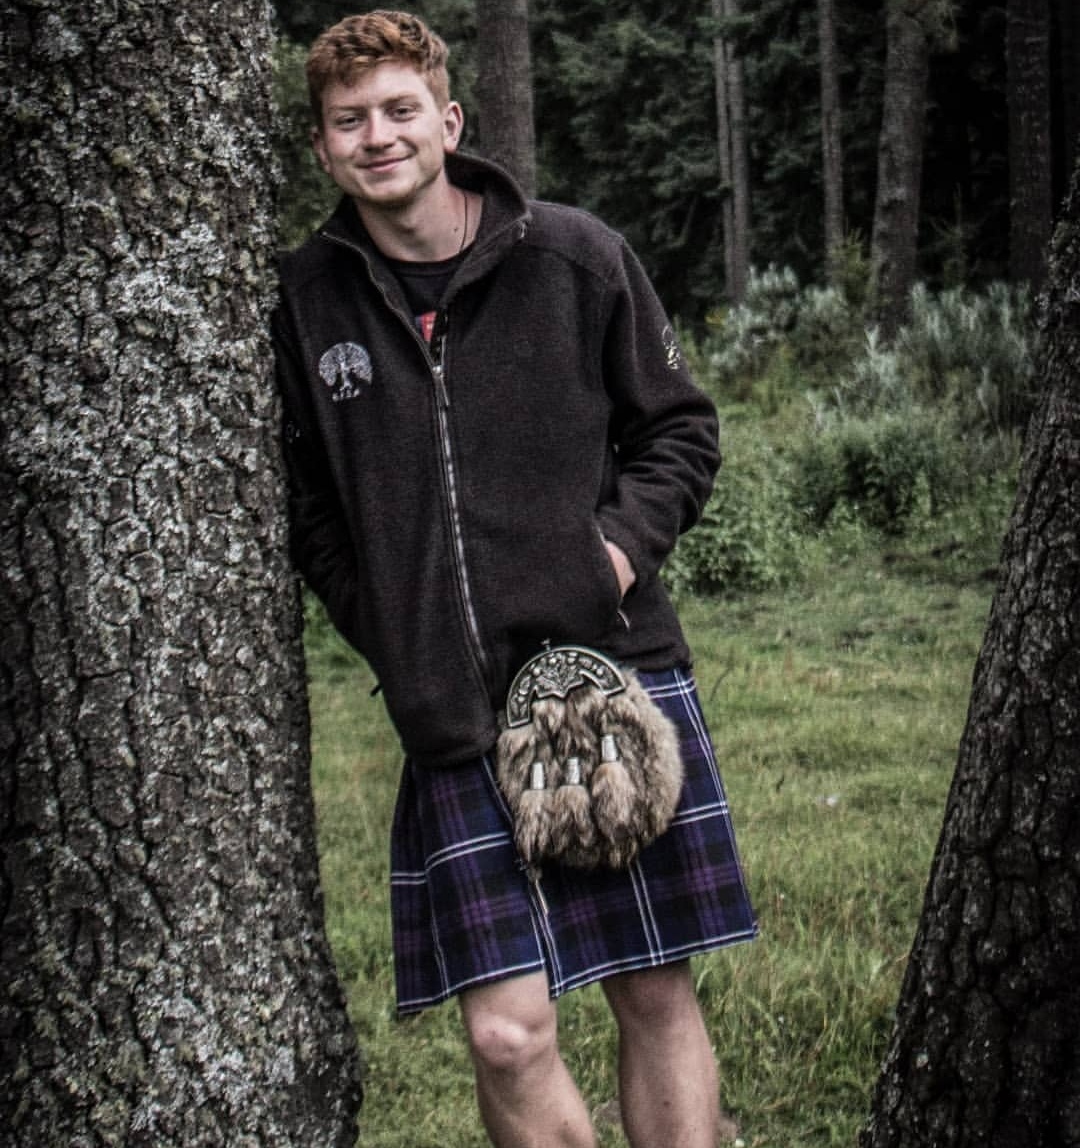 George Dennison (MFor Forestry w/ International Experience, former  @Bfsa_forestry president & former  @ifsadotnet board member) is now working with  @SylvaFoundation as a forester  https://sylva.org.uk/people . George’s outstanding dissertation was recognised by  @royal_forestry (11/-)